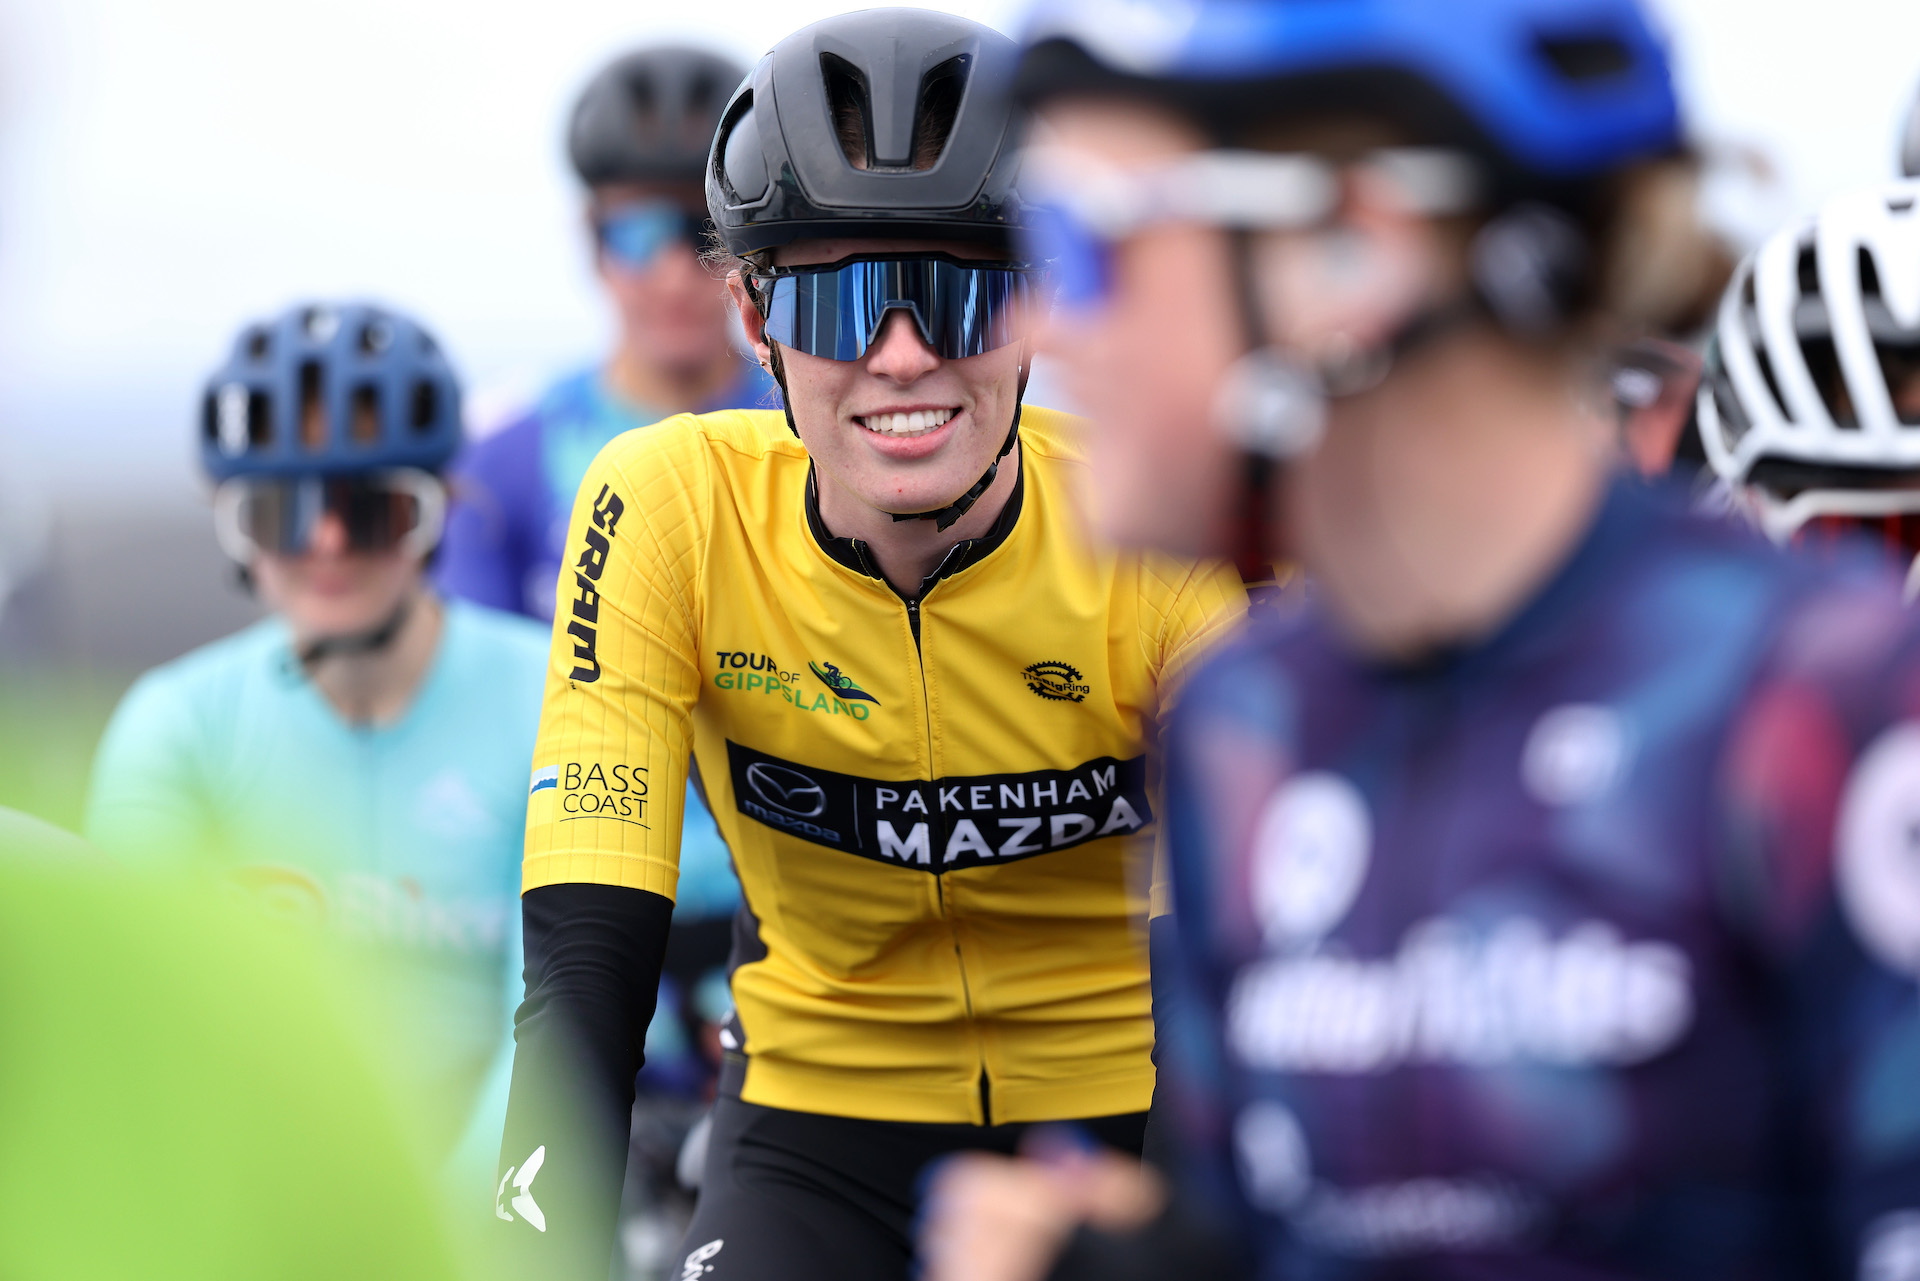 Emily Watts in the yellow leader's jersey at the start of the final stage of the Tour of Gippsland.